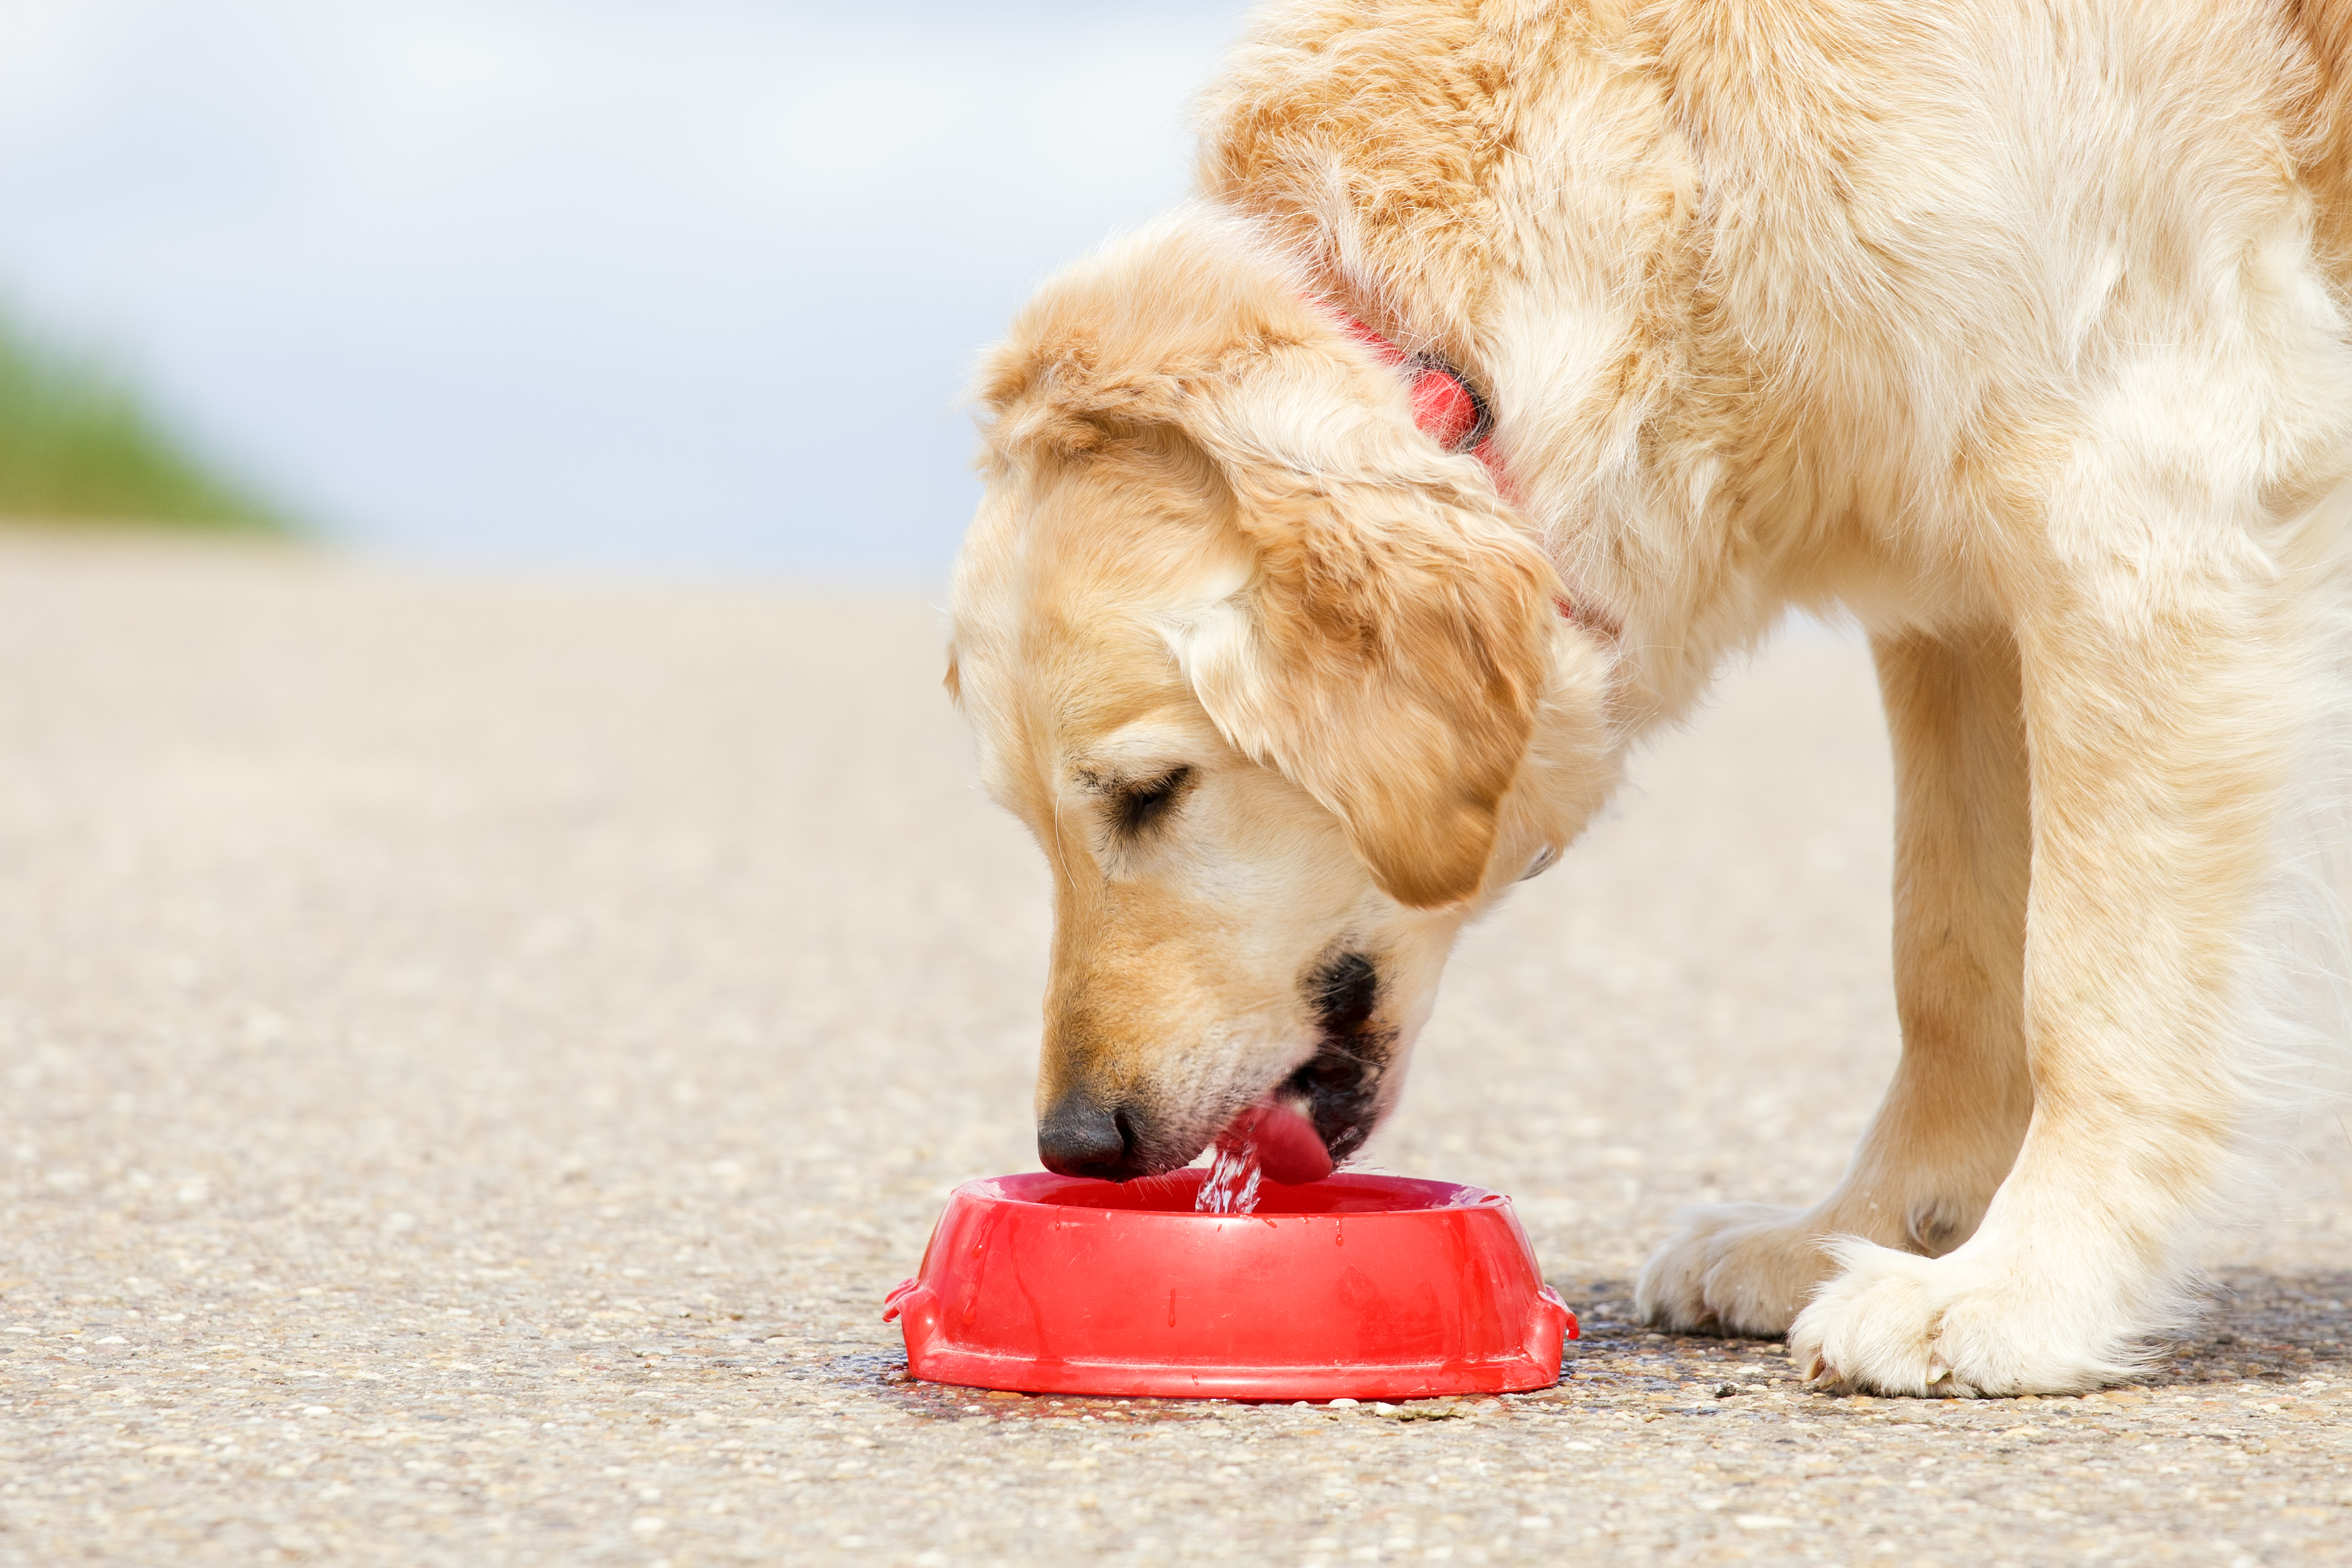 Old golden retriever drinks from a red plastic bowl